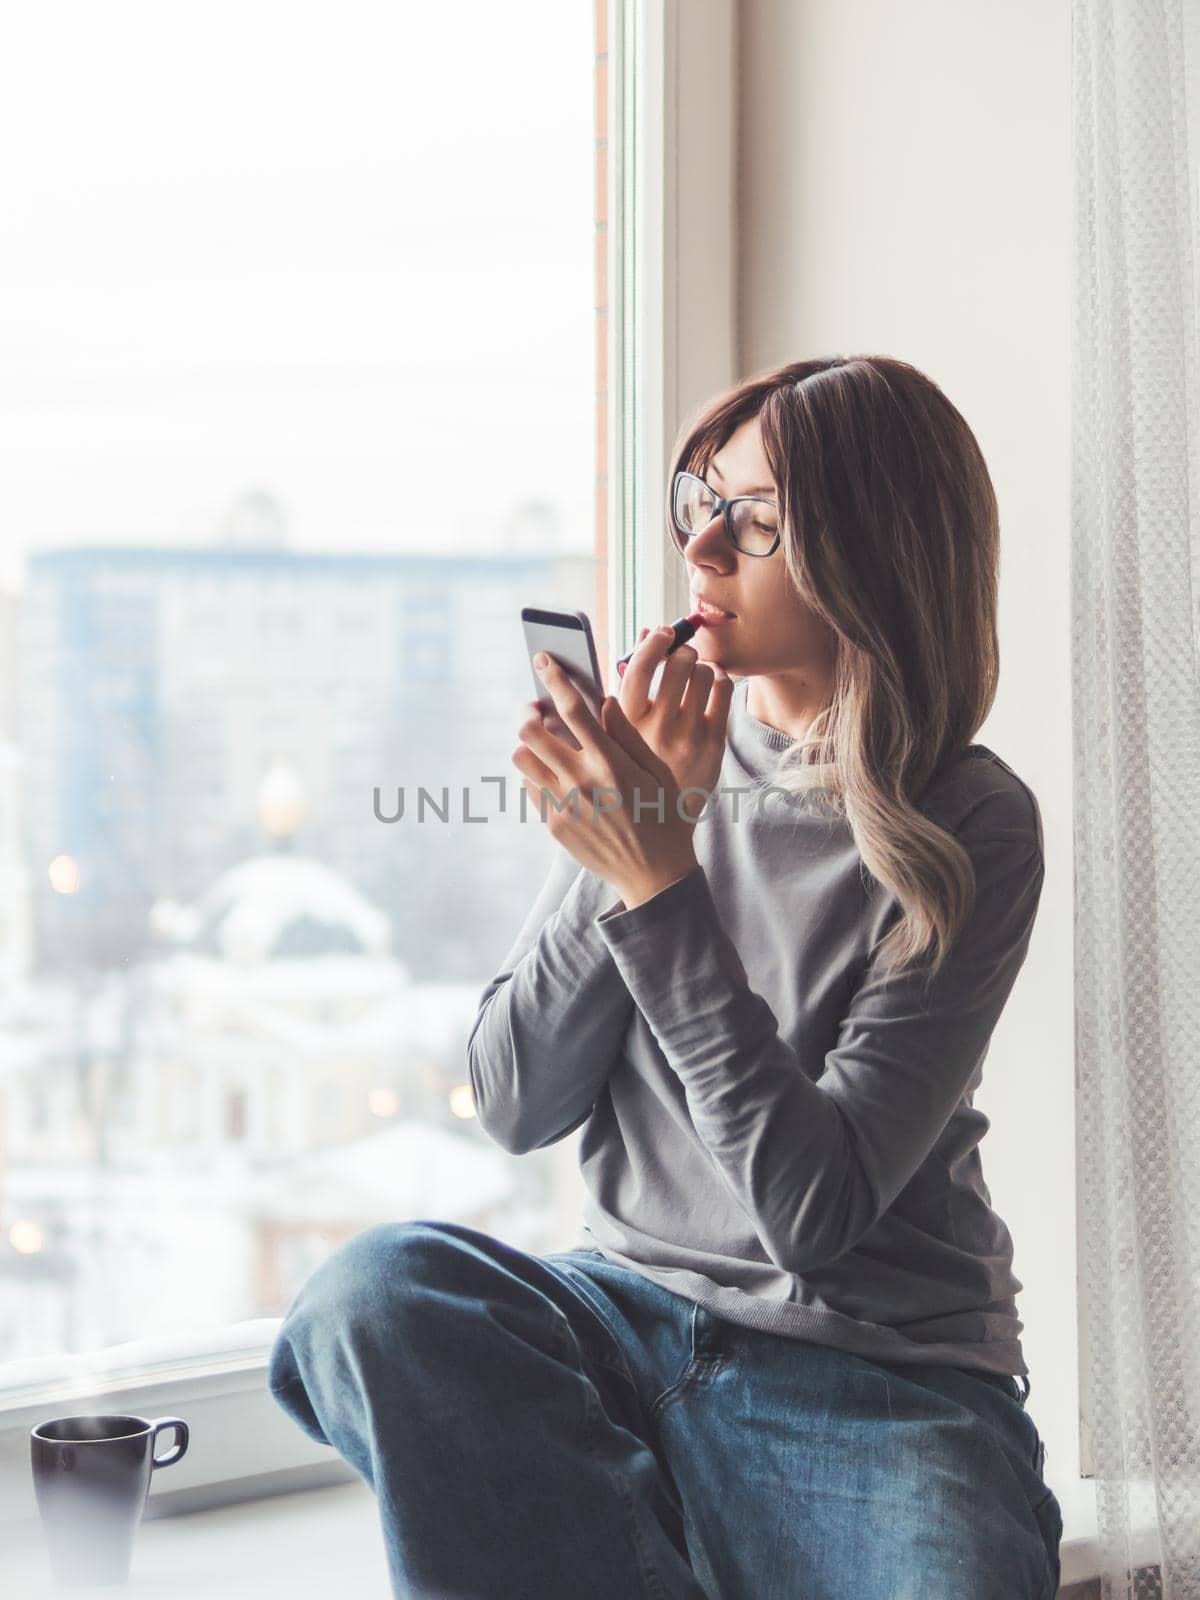 Woman with eyeglasses and curly hair paints her lips with lipstick and uses smartphone as mirror. Fast make-up. Morning routine. Cup of hot coffee on windowsill.